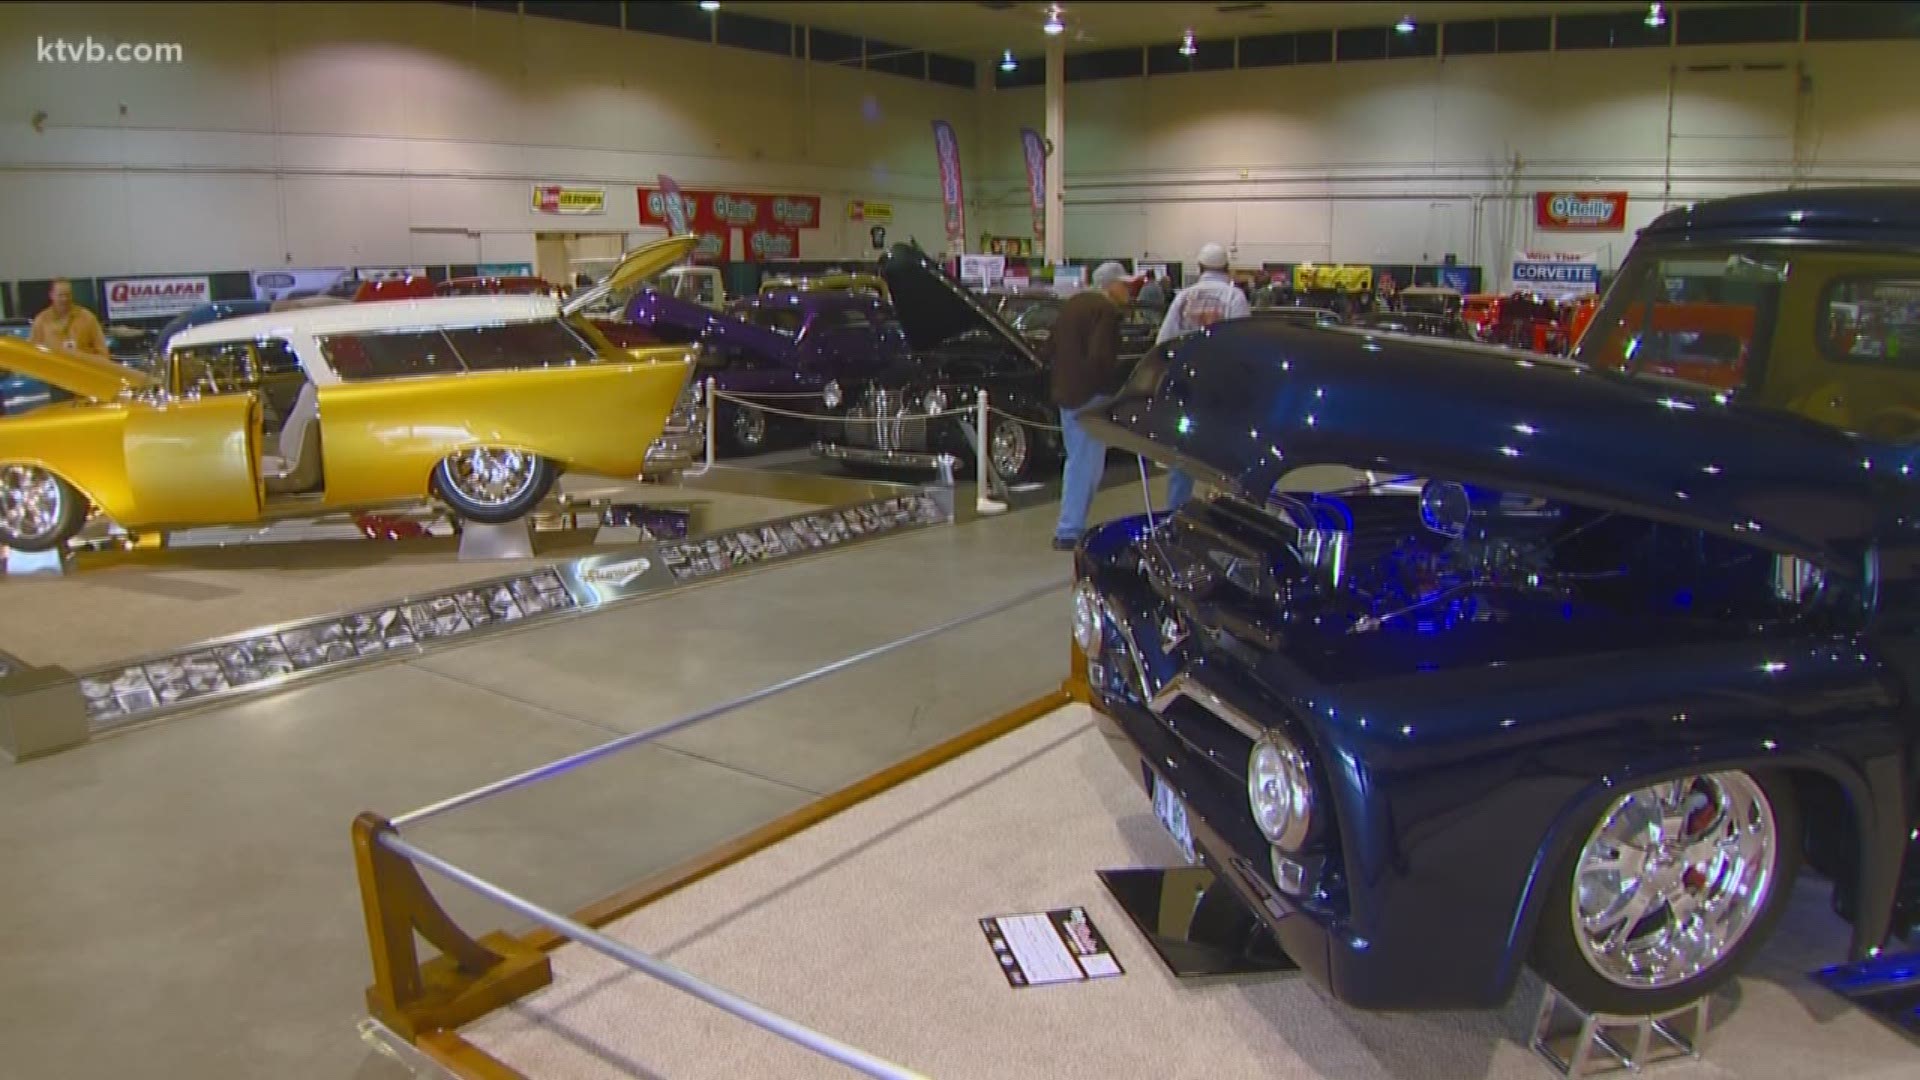 The annual Boise Roadster Show returns to Expo Idaho starting Saturday